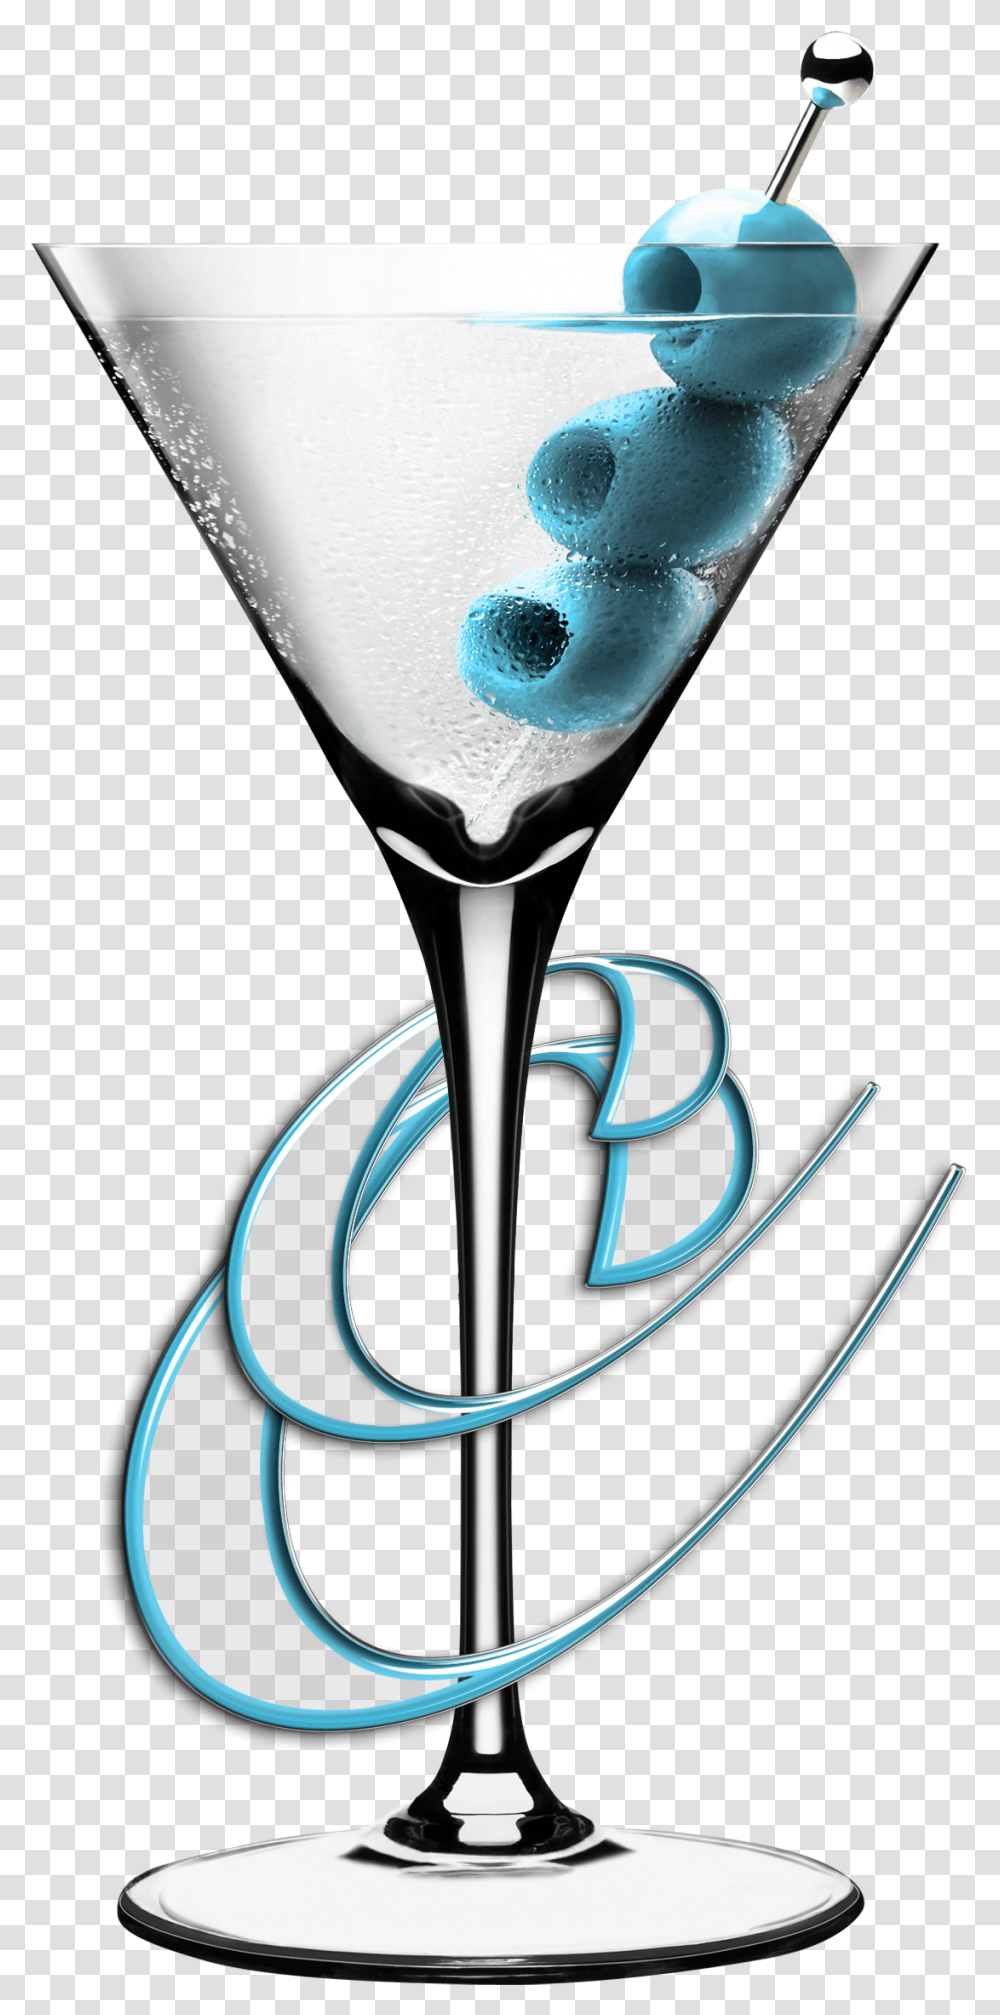 Cocktails And Caviar Martini Glass With Blue Olives Dry Martini Cocktail With Green Olive, Alcohol, Beverage, Drink, Lamp Transparent Png